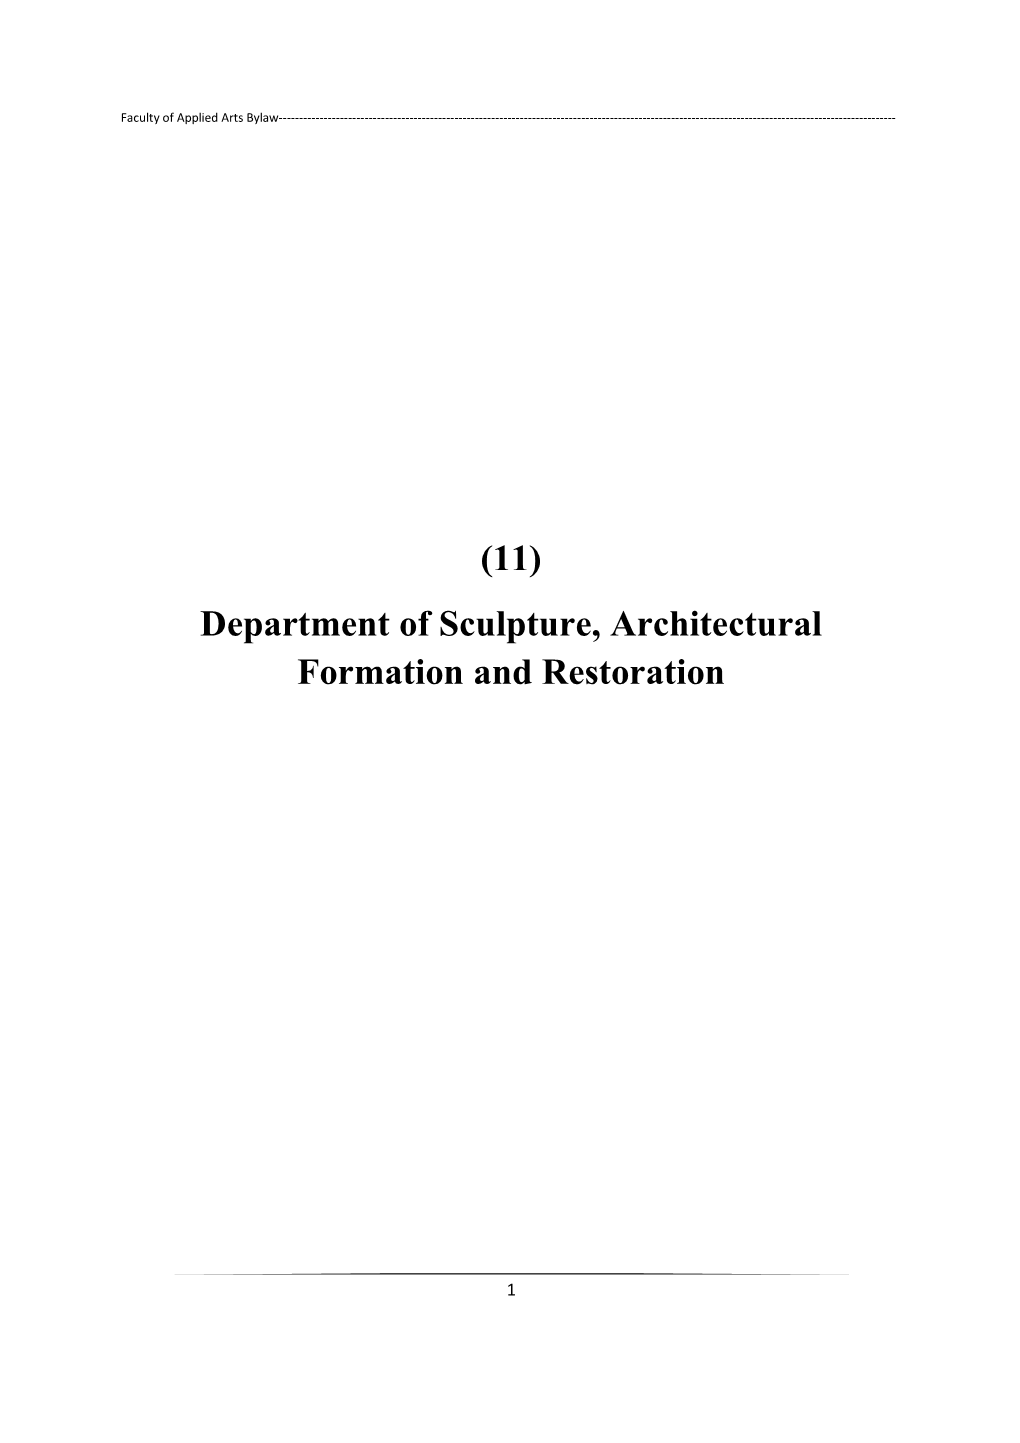 (11) Department of Sculpture, Architectural Formation and Restoration